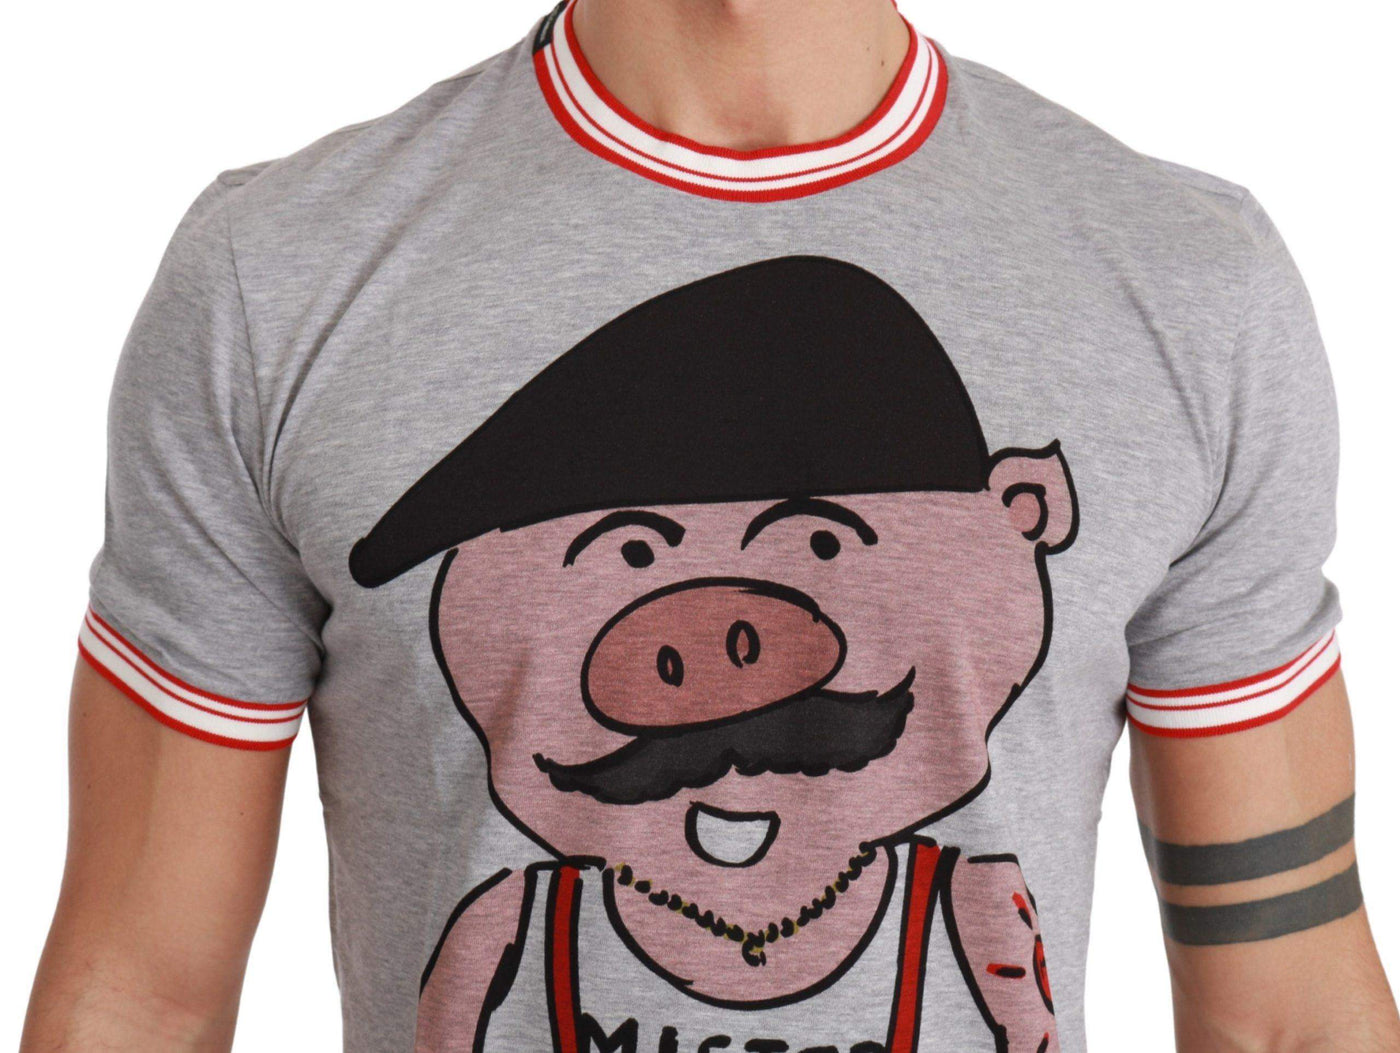 Dolce & Gabbana  Gray Cotton Top 2019 Year of the Pig T-shirt #men, Brand_Dolce & Gabbana, Catch, Dolce & Gabbana, feed-agegroup-adult, feed-color-gray, feed-gender-male, feed-size-IT44 | XS, feed-size-IT46 | S, feed-size-IT48 | M, feed-size-IT50 | L, feed-size-IT52 | L, Gender_Men, Gray, IT44 | XS, IT46 | S, IT48 | M, IT50 | L, IT52 | L, Kogan, Men - New Arrivals, T-shirts - Men - Clothing at SEYMAYKA